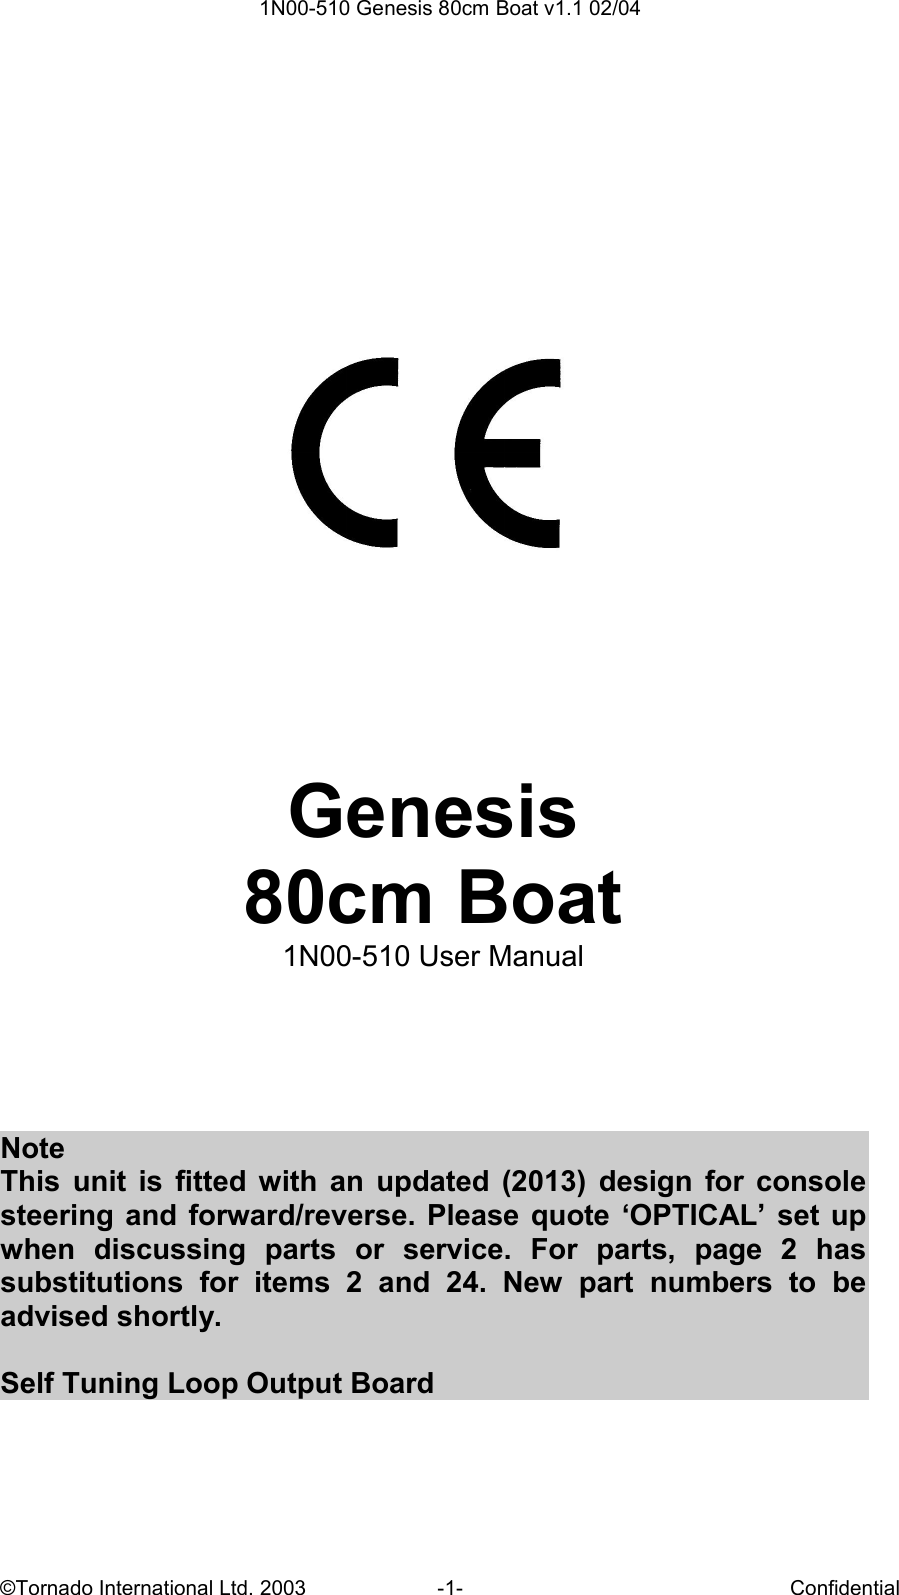  1N00-510 Genesis 80cm Boat v1.1 02/04 ©Tornado International Ltd. 2003  -1-  Confidential        Genesis  80cm Boat 1N00-510 User Manual      Note This  unit  is  fitted with  an  updated  (2013)  design  for  console steering and forward/reverse. Please quote ‘OPTICAL’ set up when  discussing  parts  or  service.  For  parts,  page  2  has substitutions  for  items  2  and  24.  New  part  numbers  to  be advised shortly.  Self Tuning Loop Output Board  